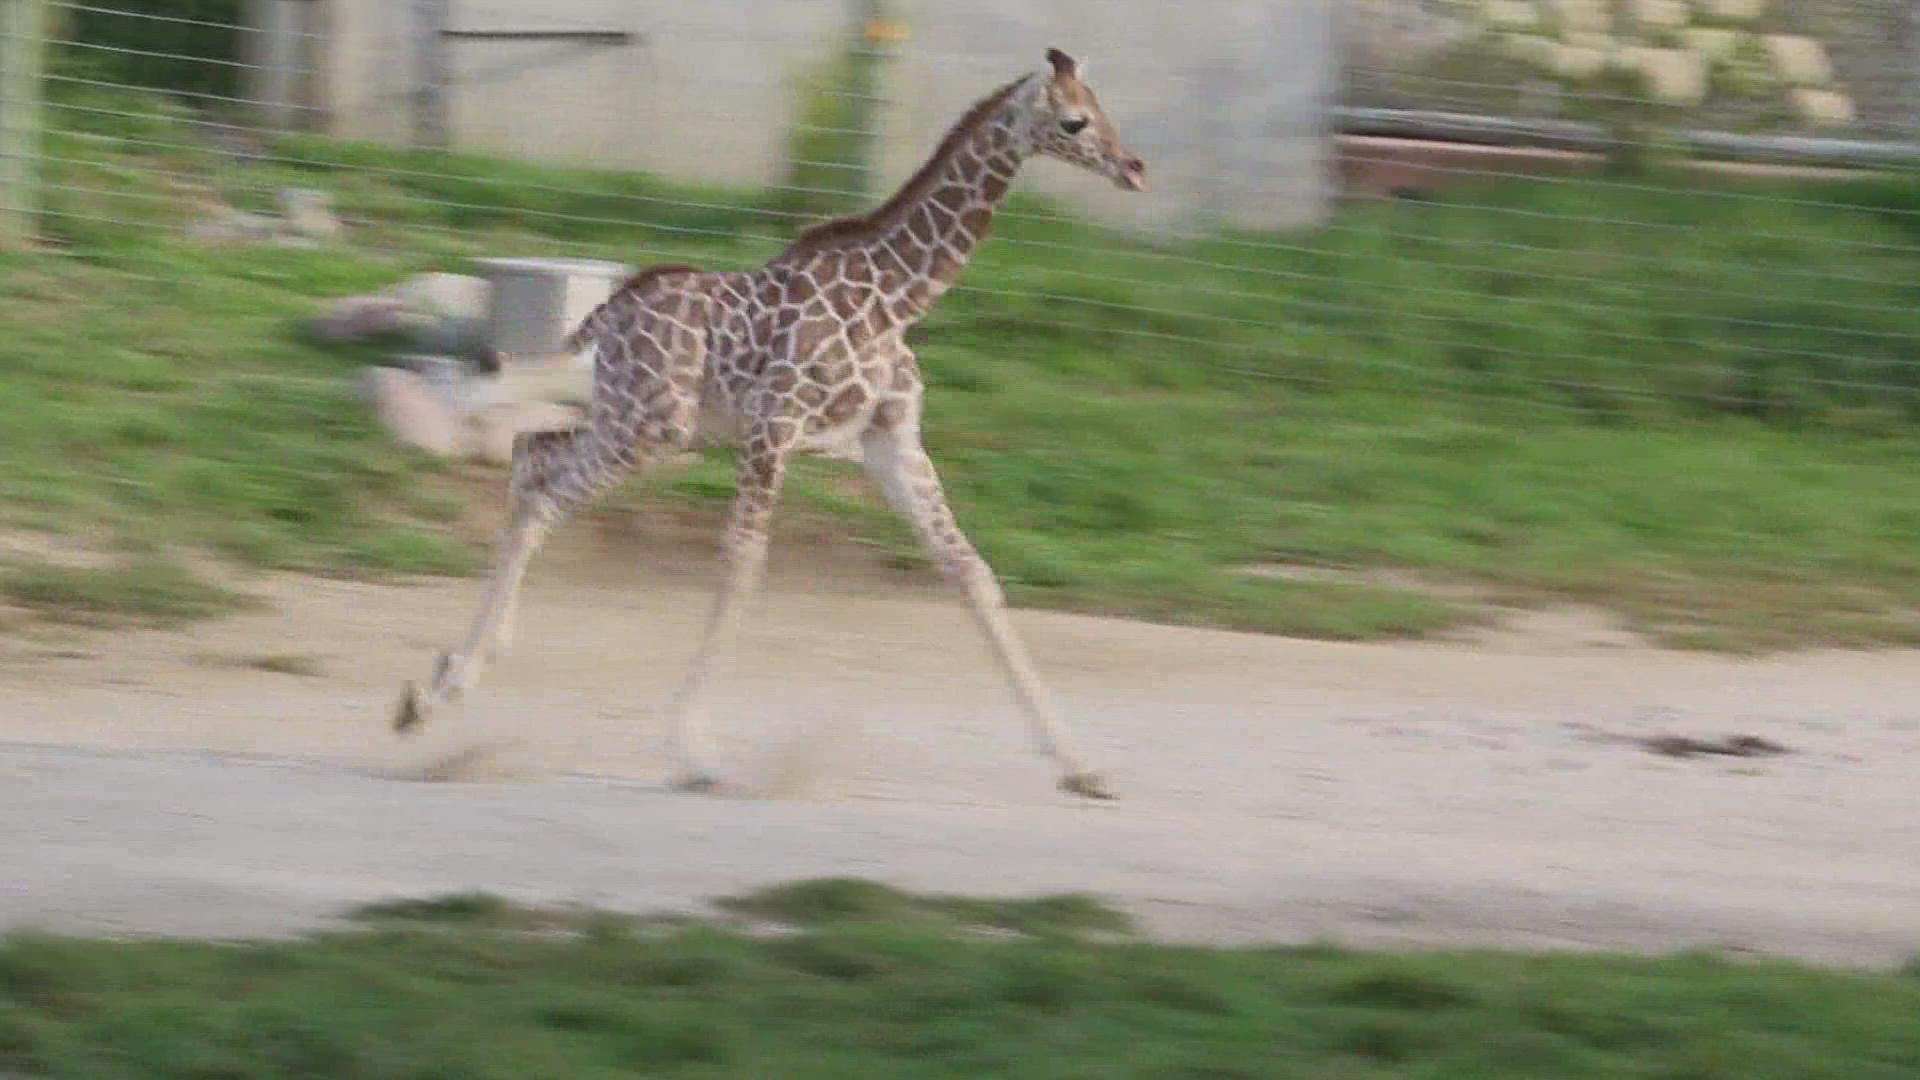 Bakari, the baby giraffe born at the Blank Park Zoo last month, takes his first steps OUTSIDE! Plus Halloween Zoo Brew & Night Eyes. | Sponsored Content